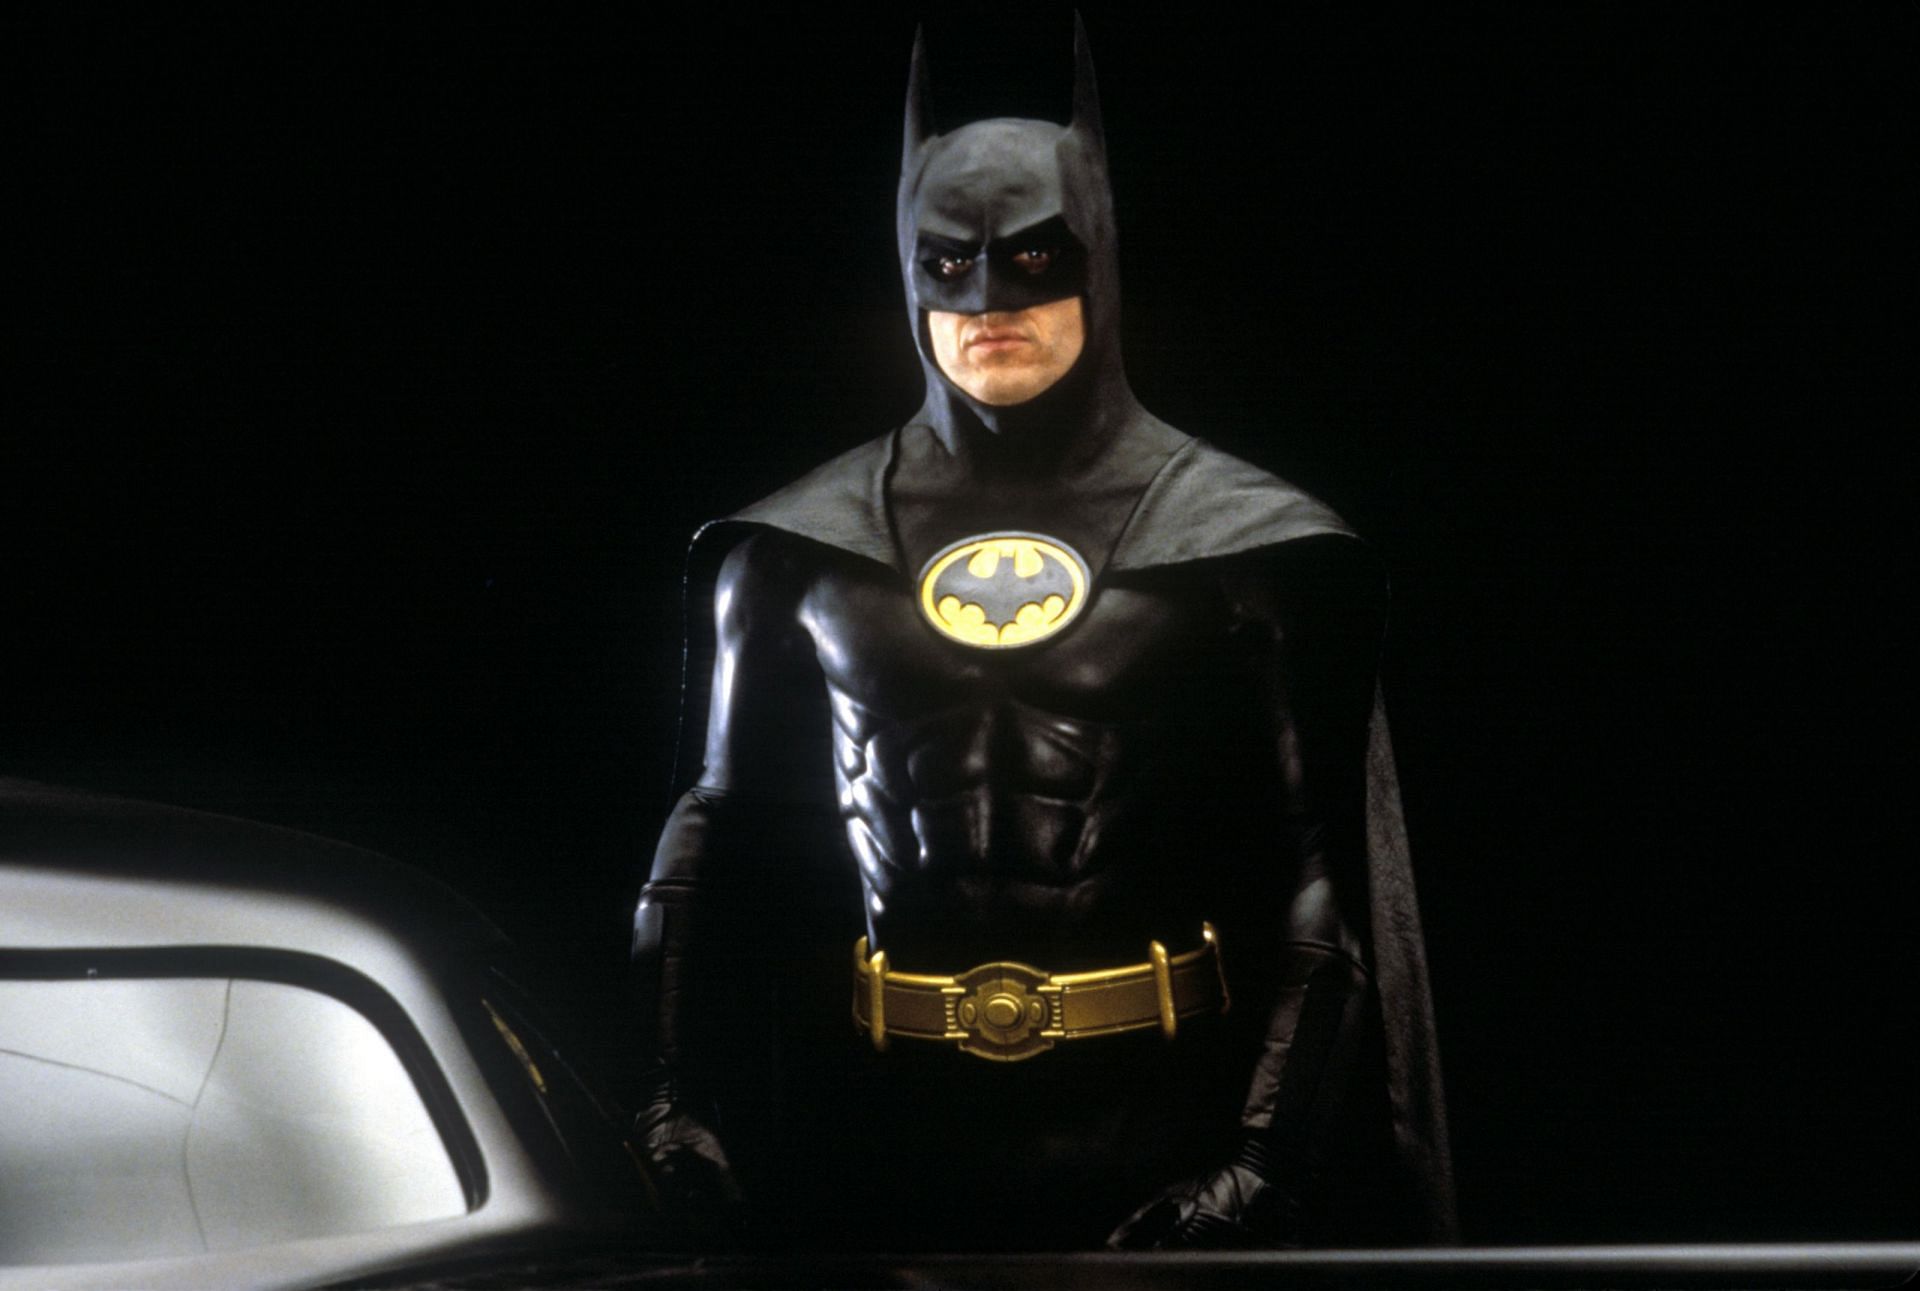 From symbols to superhero: Reflecting on the importance of Batman&#039;s character and legacy (Image via Warner Bros)